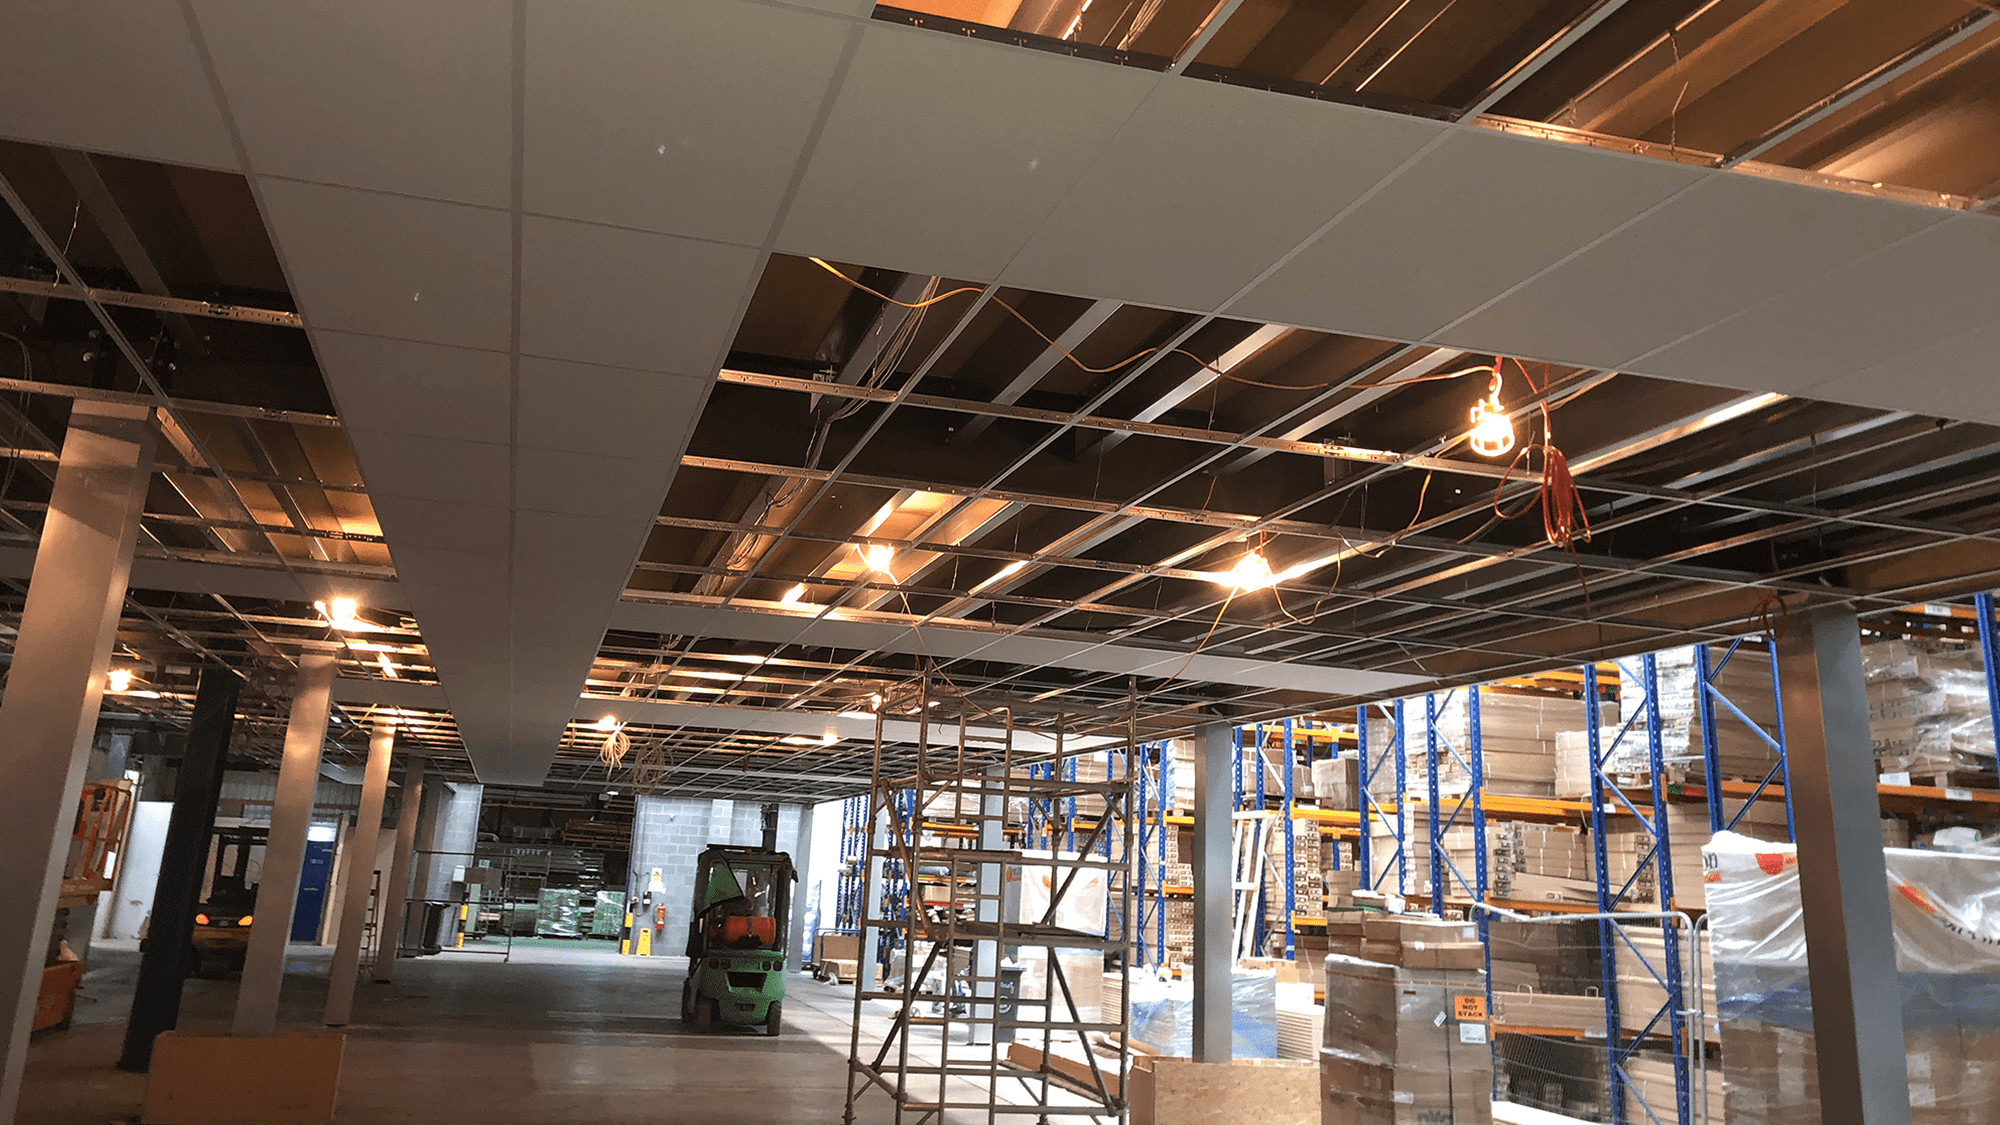 Suspended Ceiling & Electrical Install